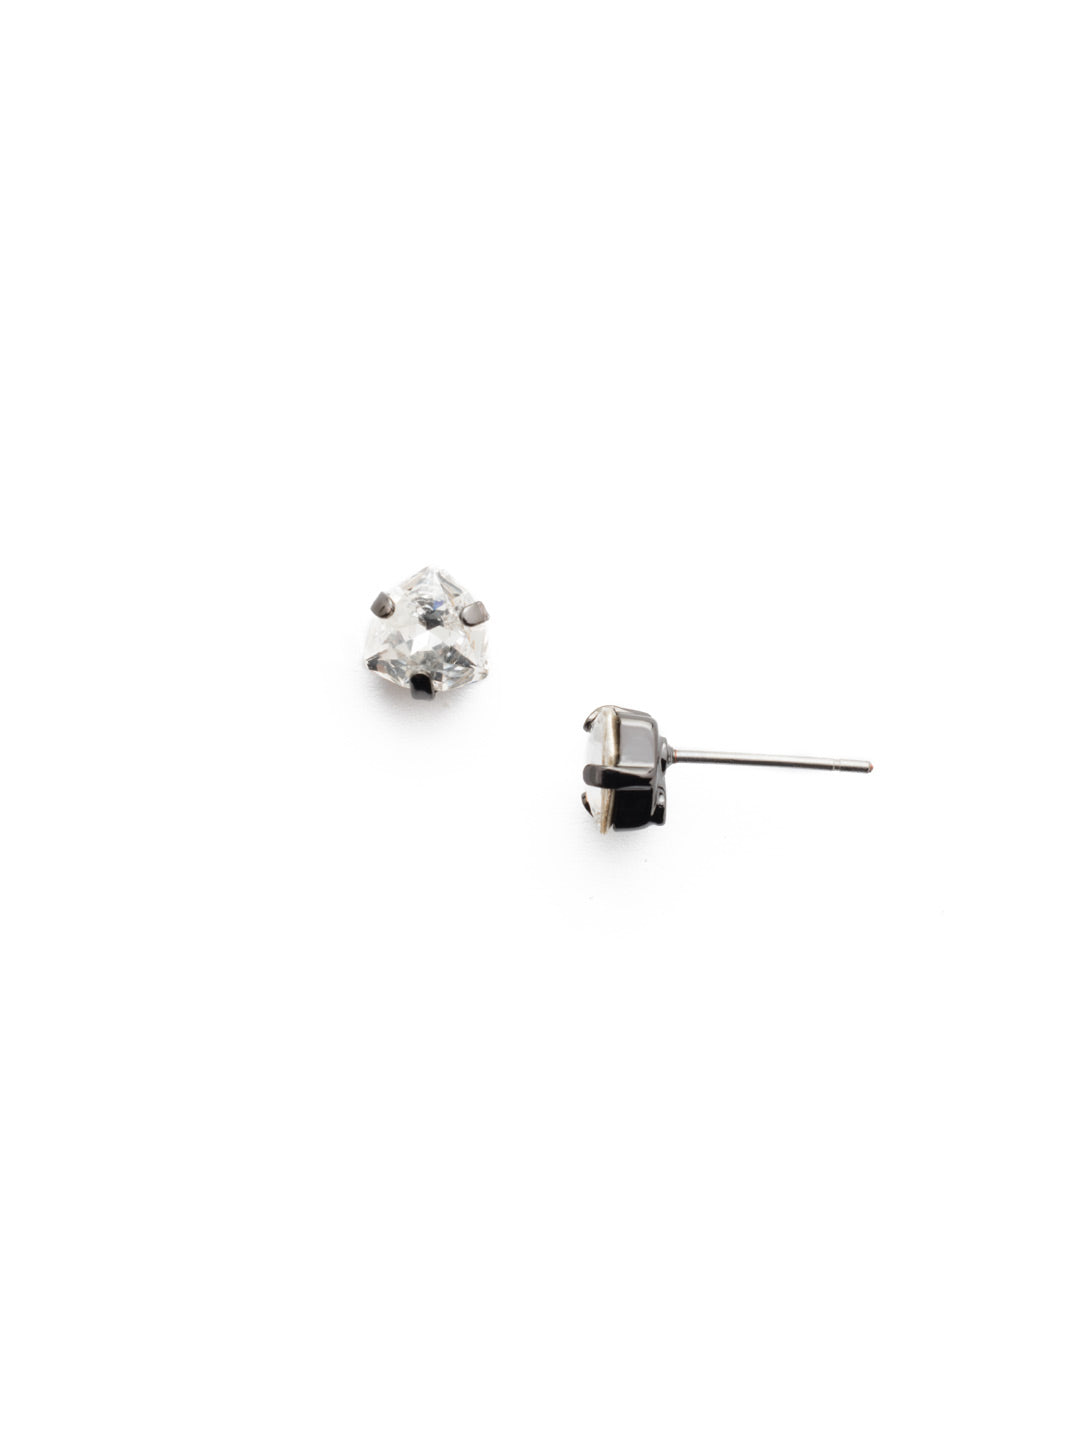 Sedge Stud Earrings - EDX1GMGNS - A shield shaped crystal in a simple pronged setting. Perfect if you want to add just a bit of sparkle to any outfit! From Sorrelli's Golden Shadow collection in our Gun Metal finish.